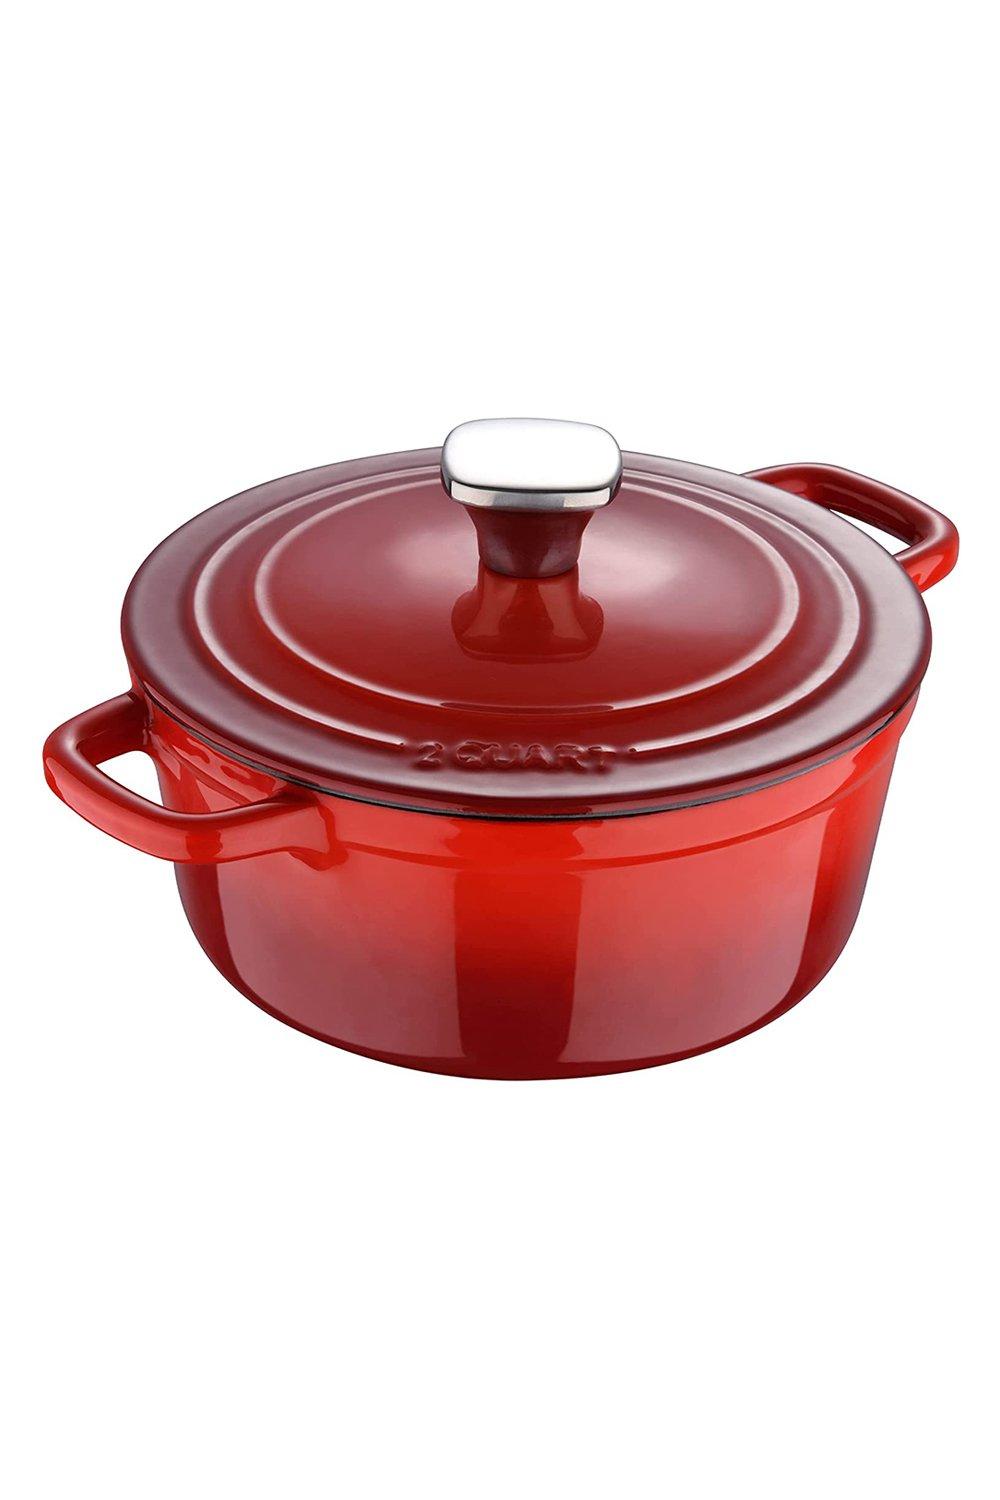 Enamel Cast Iron Casserole Dish with Lid 1.9L Red